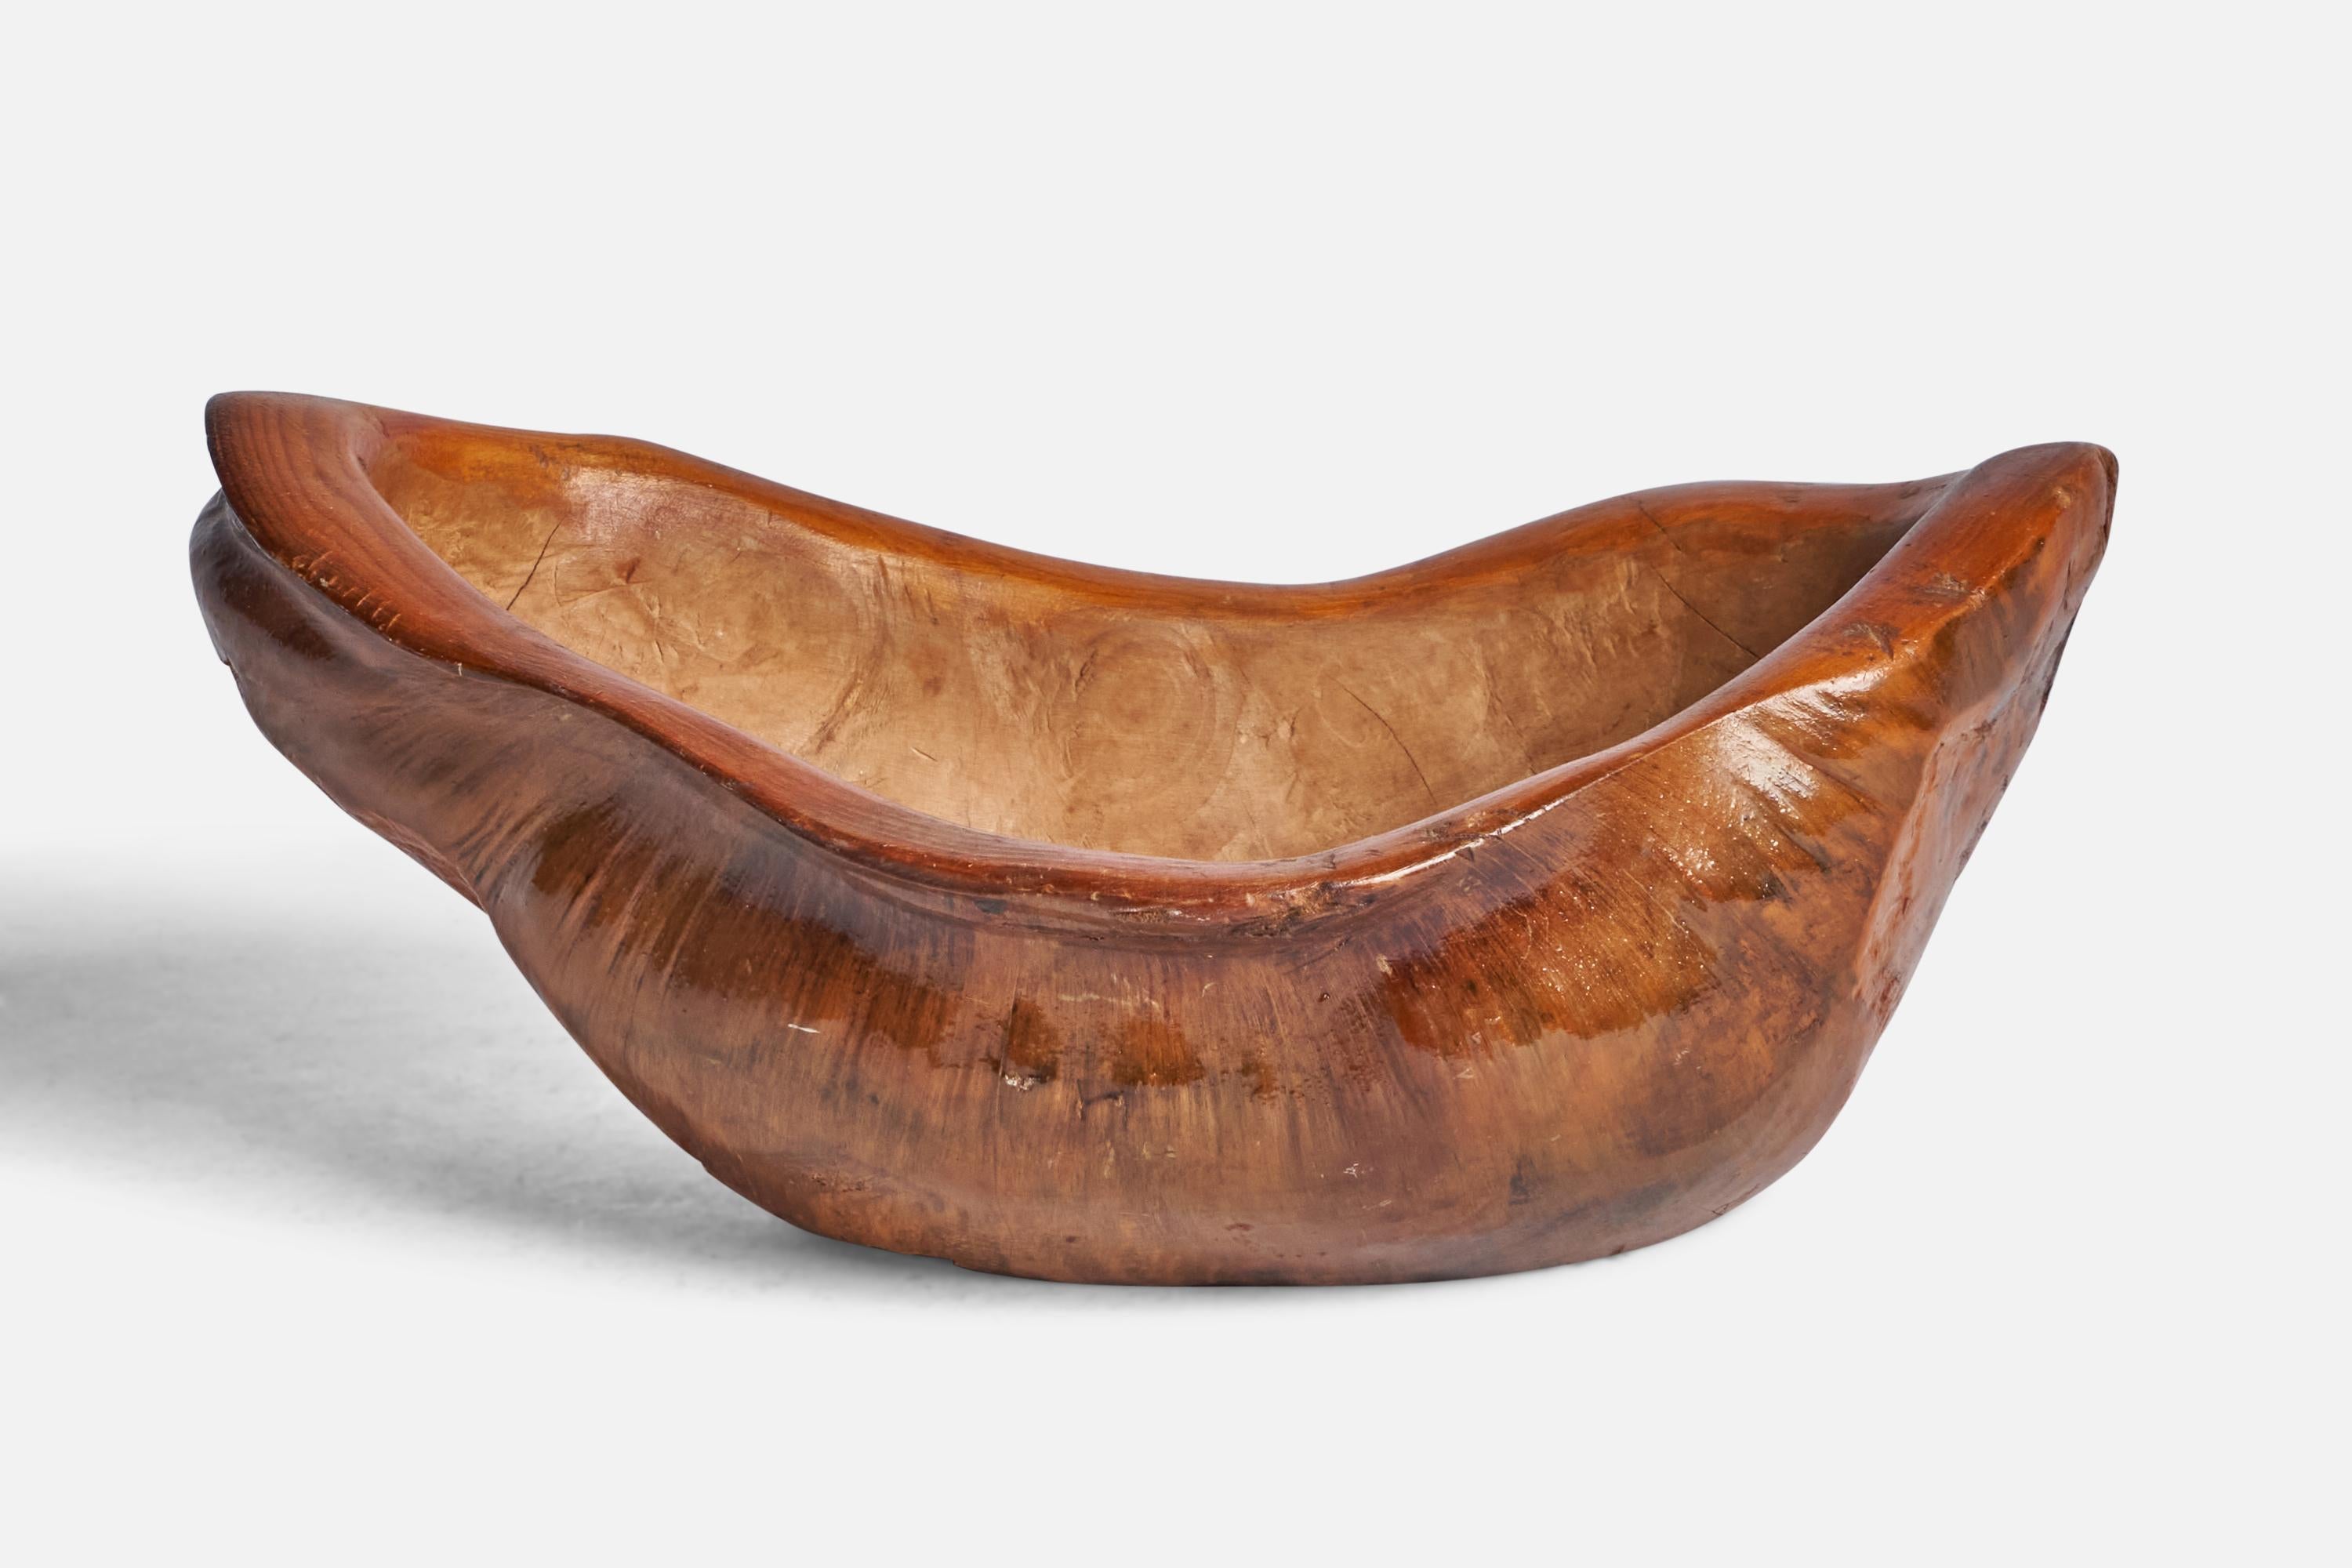 A freeform burl wood bowl designed and produced in Sweden, 1960s.